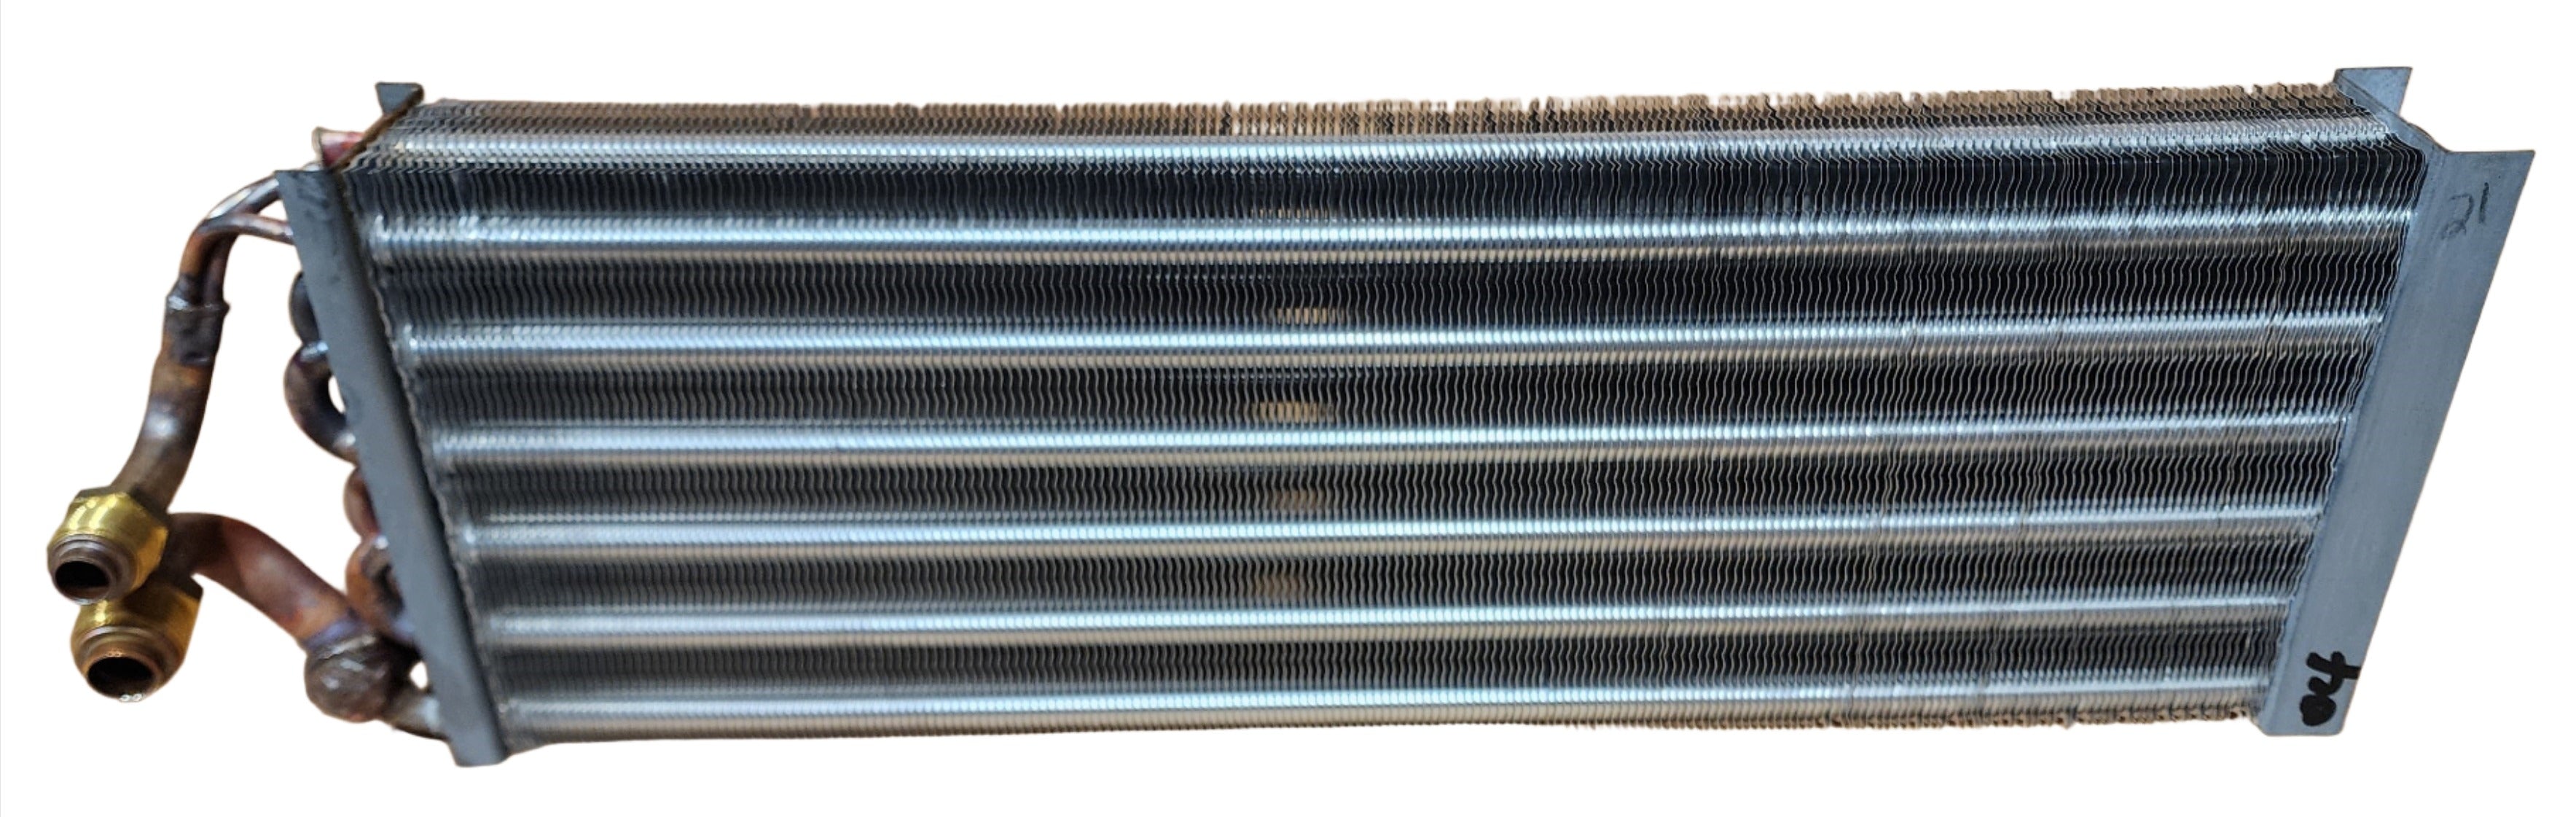 AC Evaporator Coil Core for Red Dot R-9777 Units 76R5820